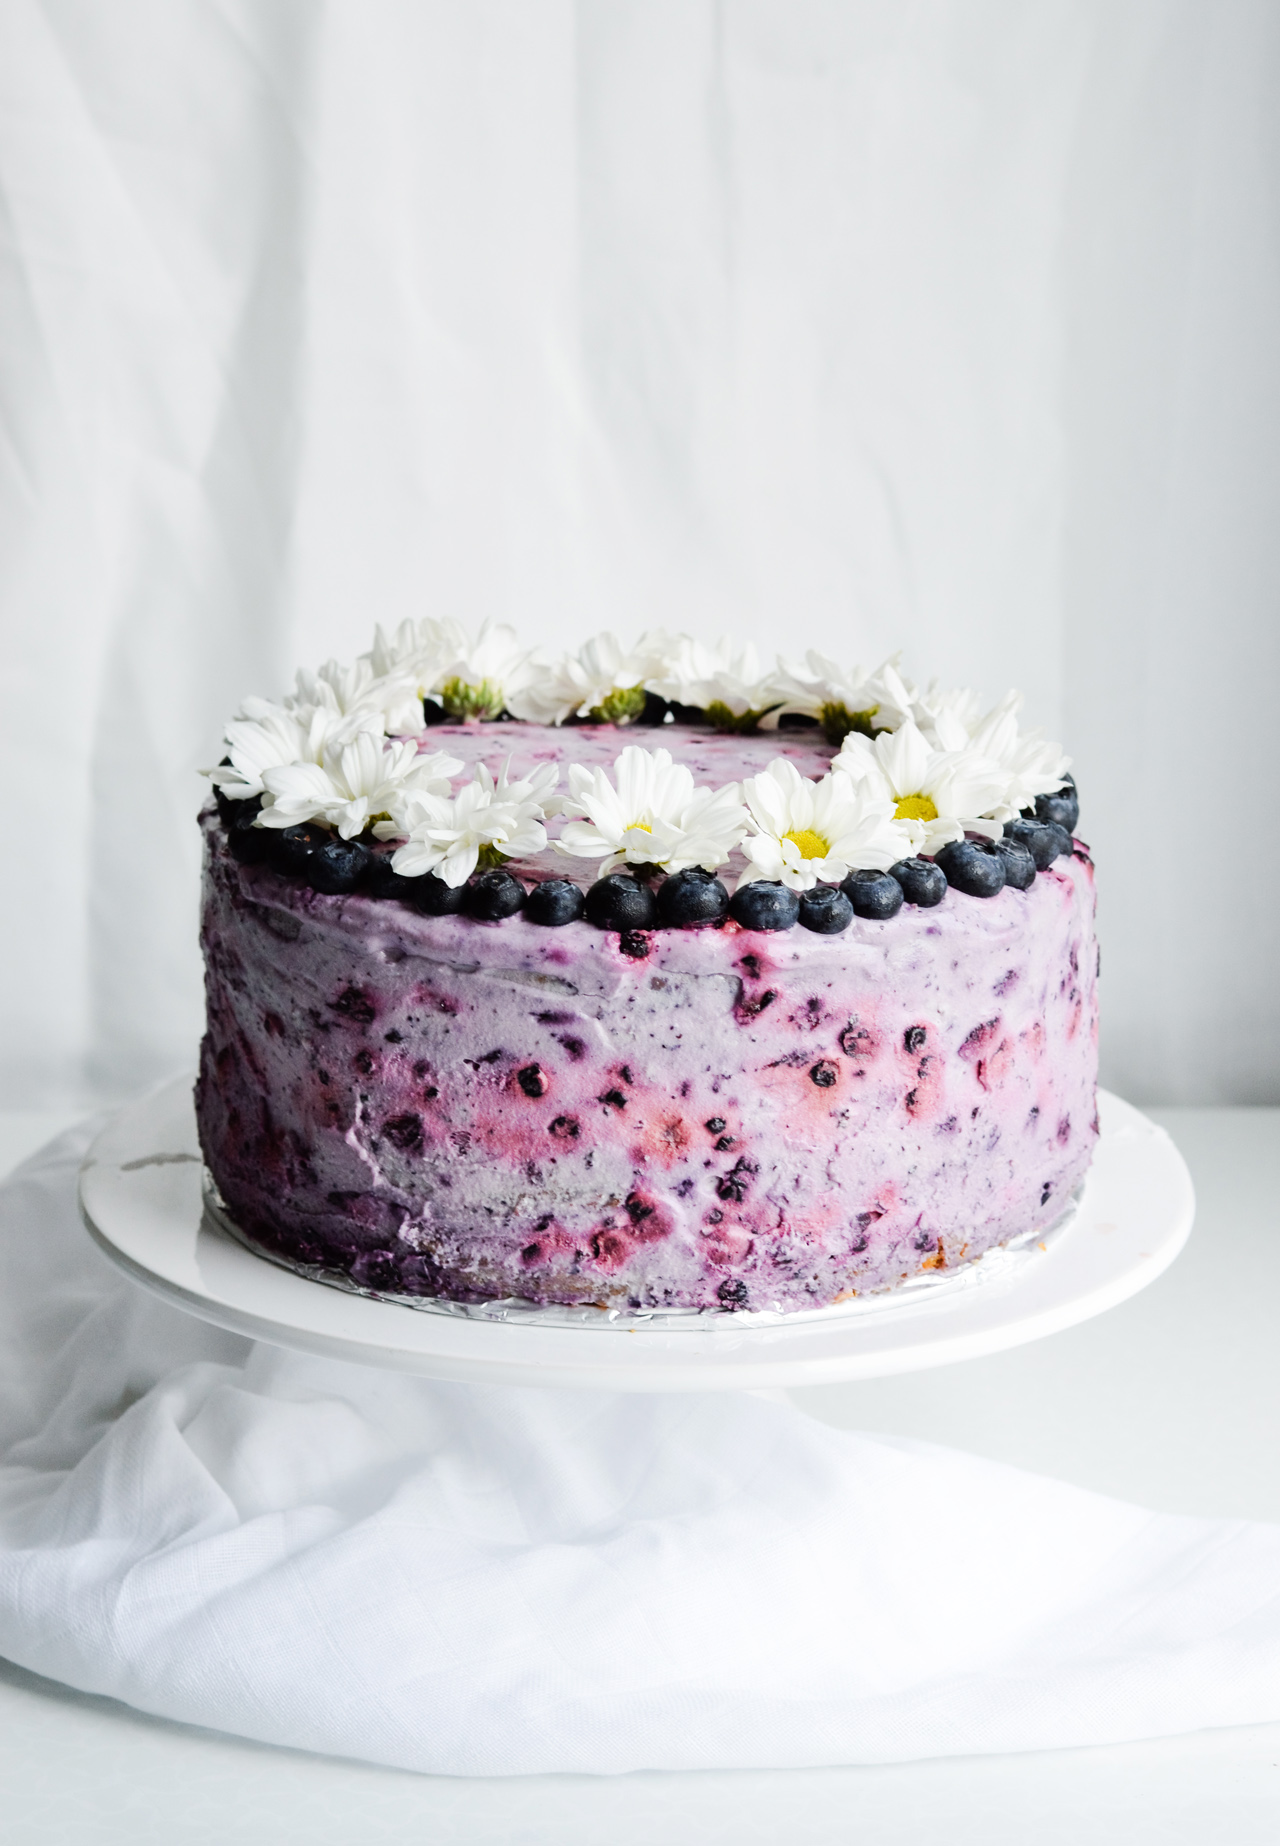 Very blueberry layer cake - a pretty purple sour cream cake with whipped cream and fresh blueberries! Great for birthdays, picnics, parties, weddings.